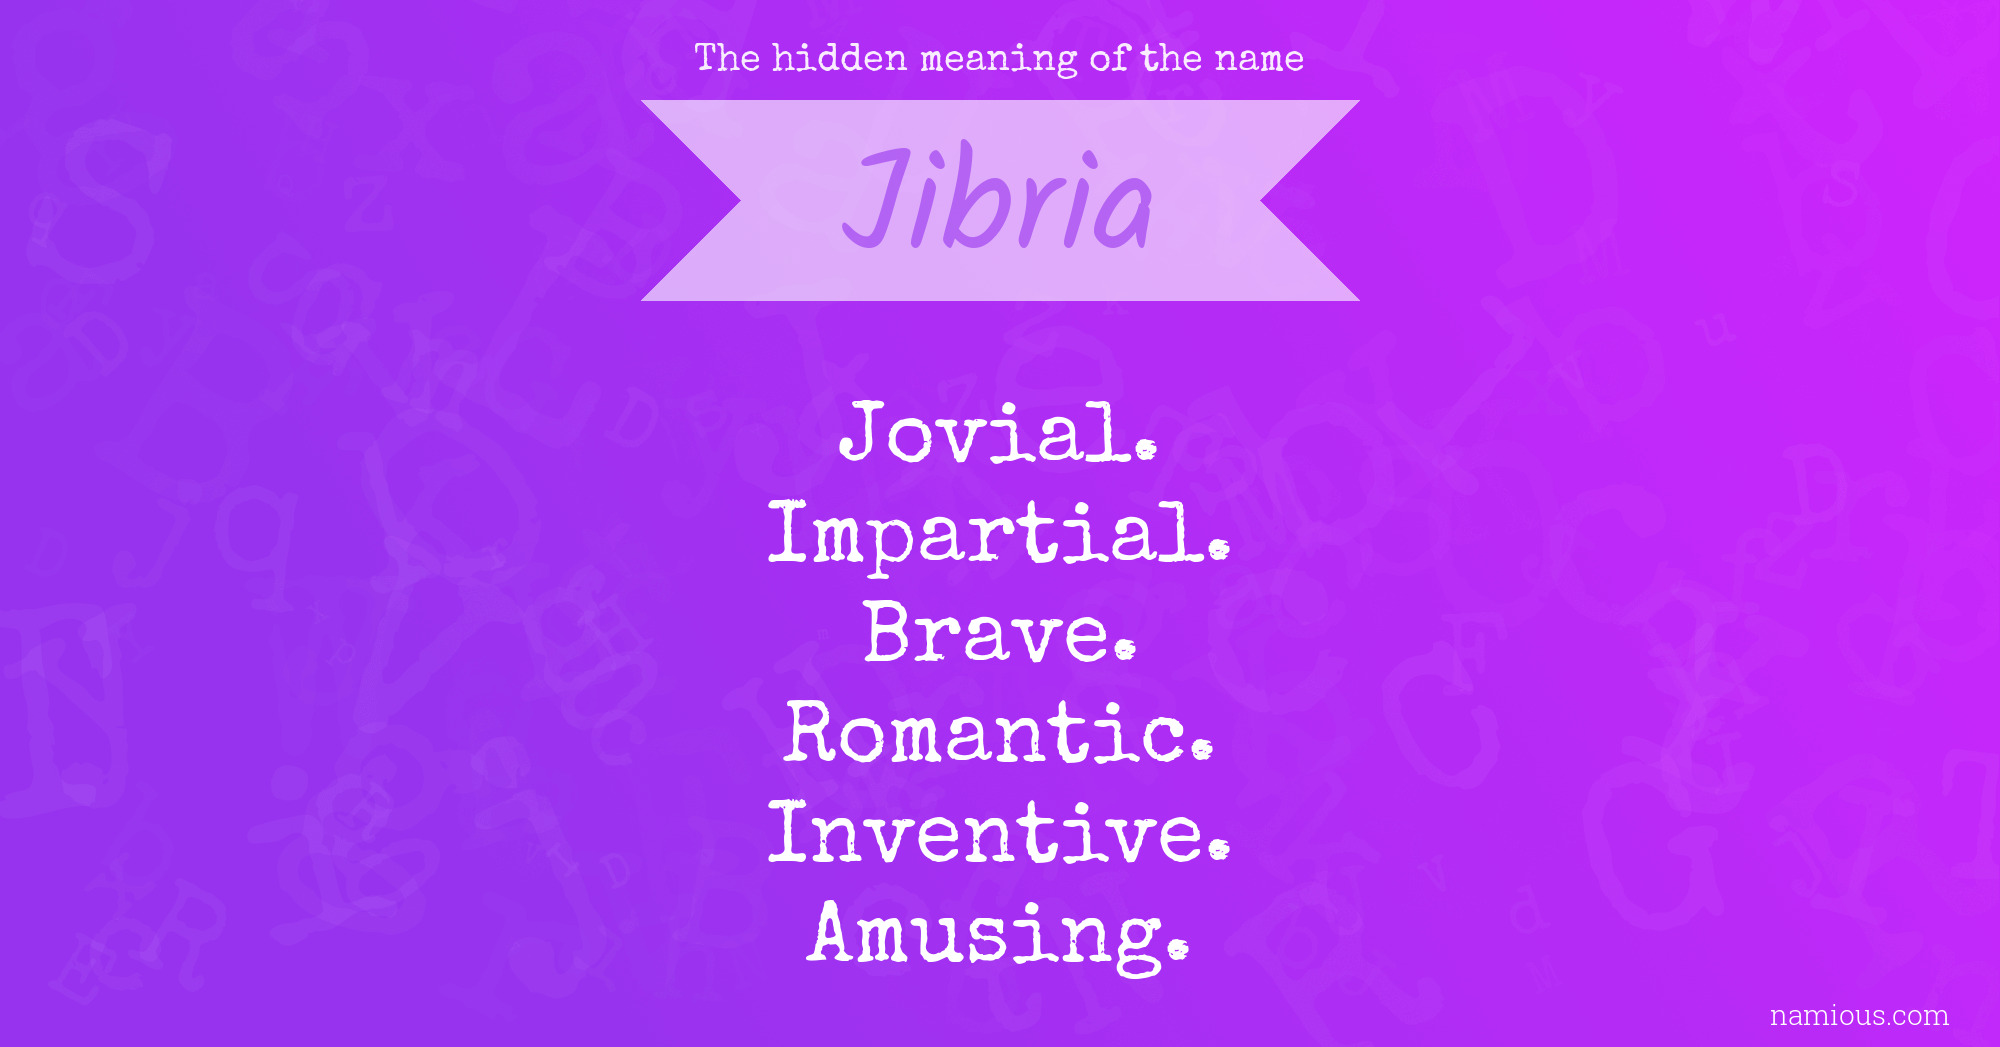 The hidden meaning of the name Jibria